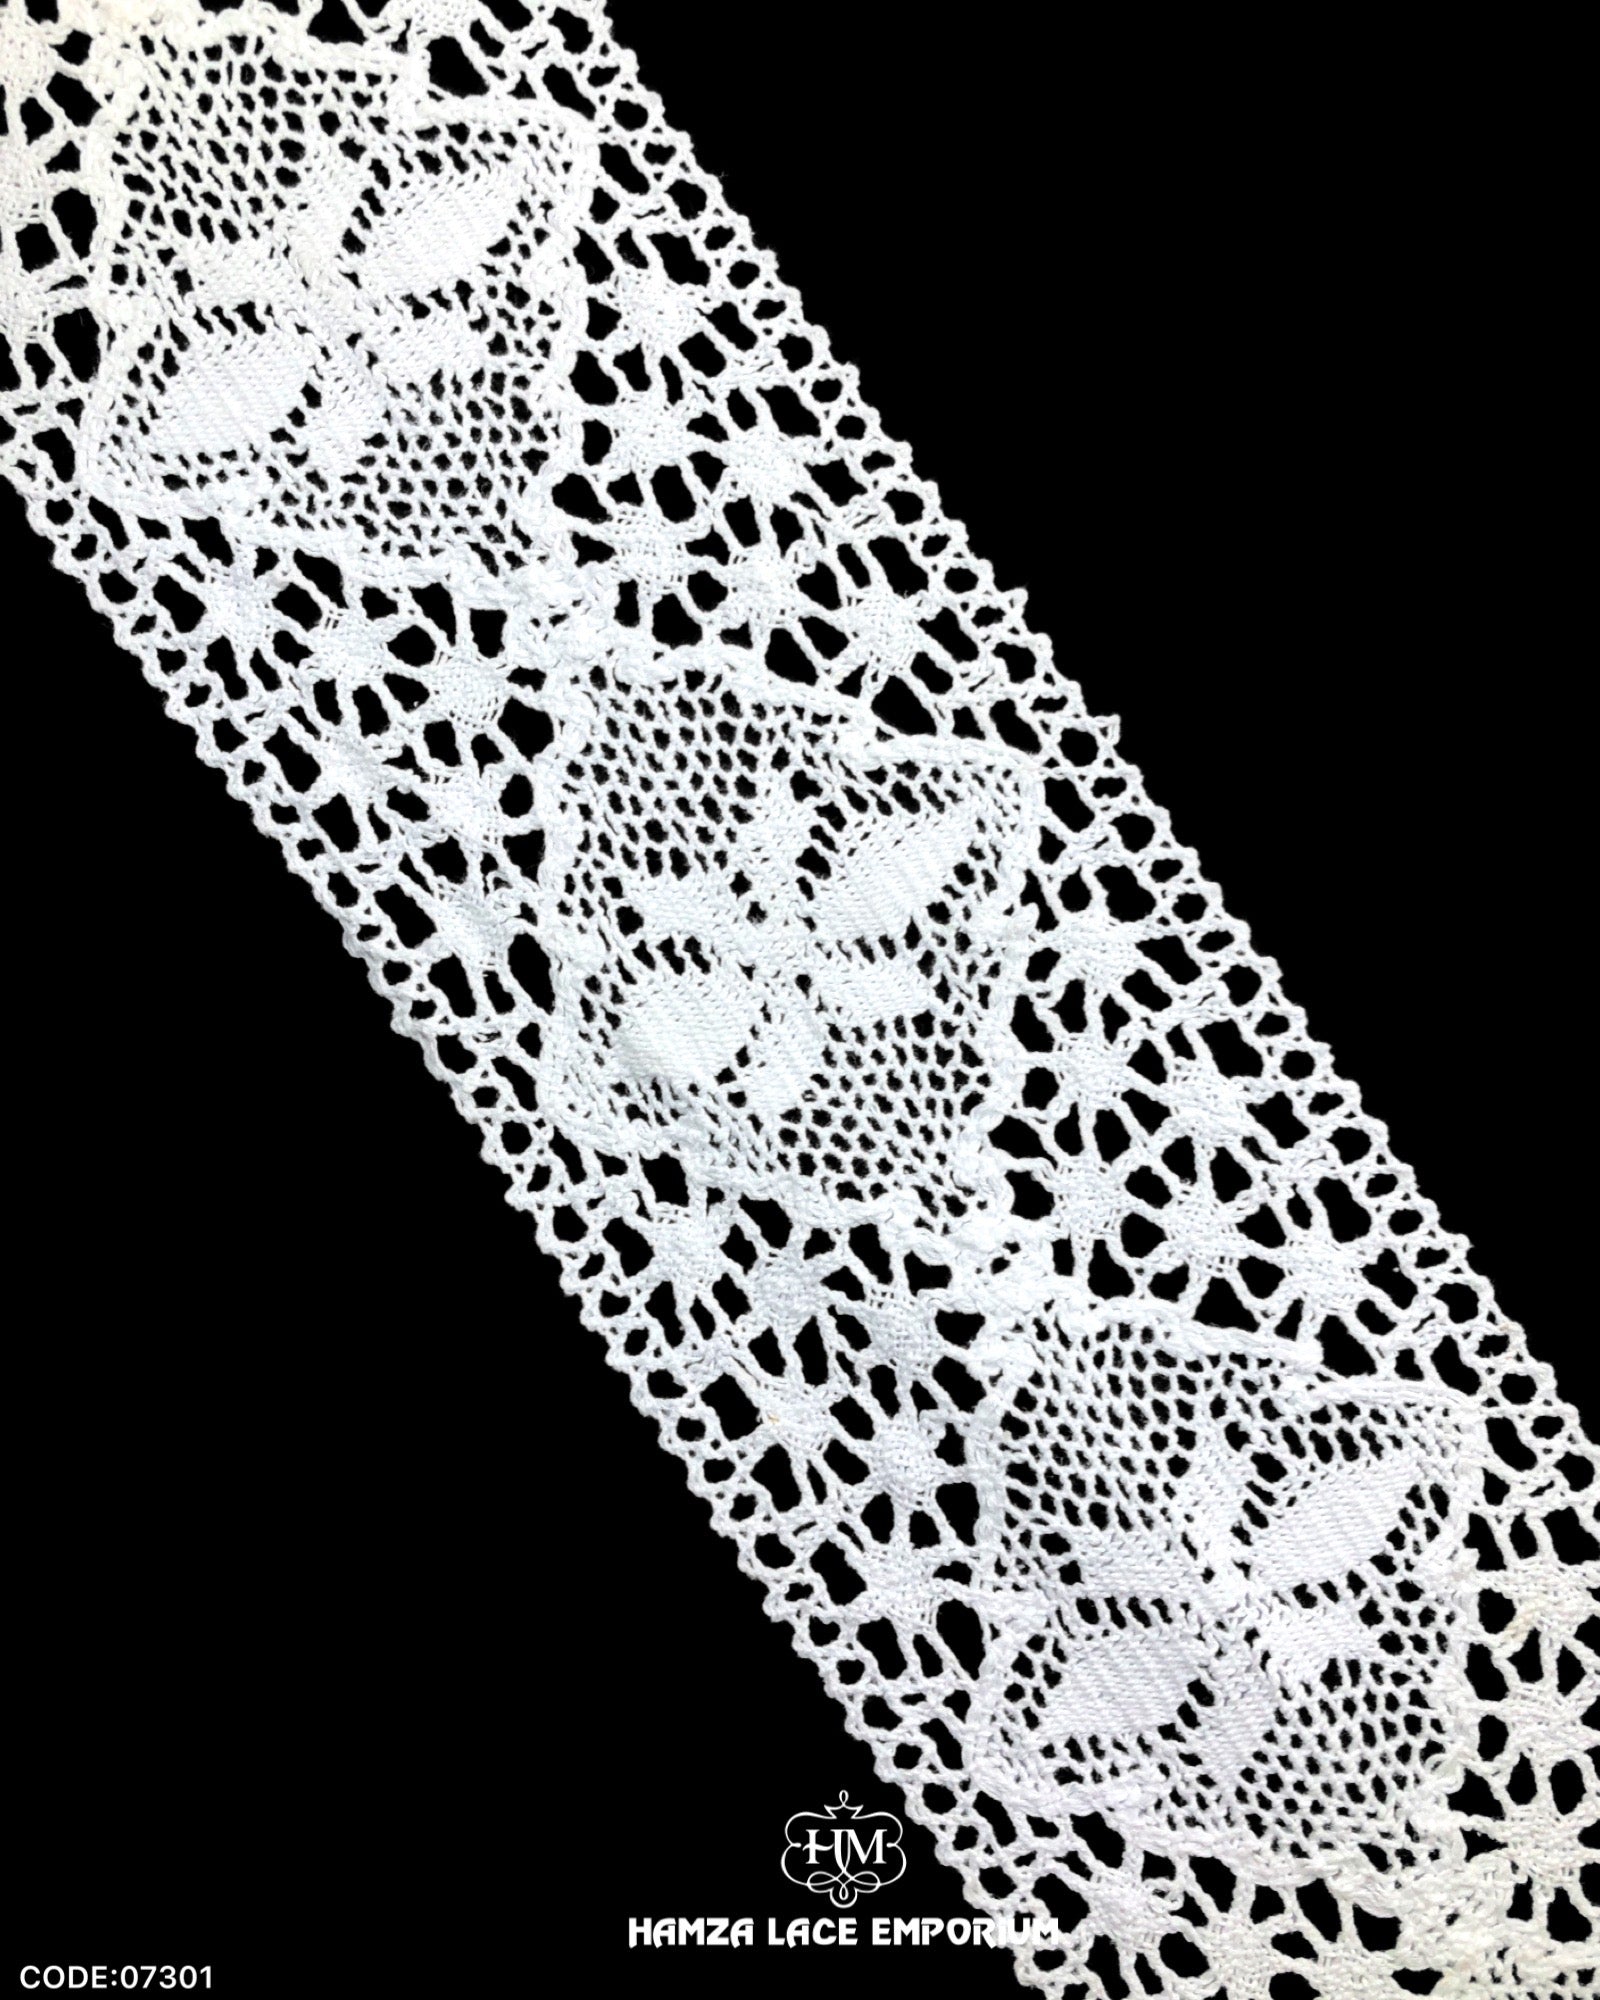 'Center Filling Crochet Lace 07301' with the brand name 'Hamza Lace' written at the bottom